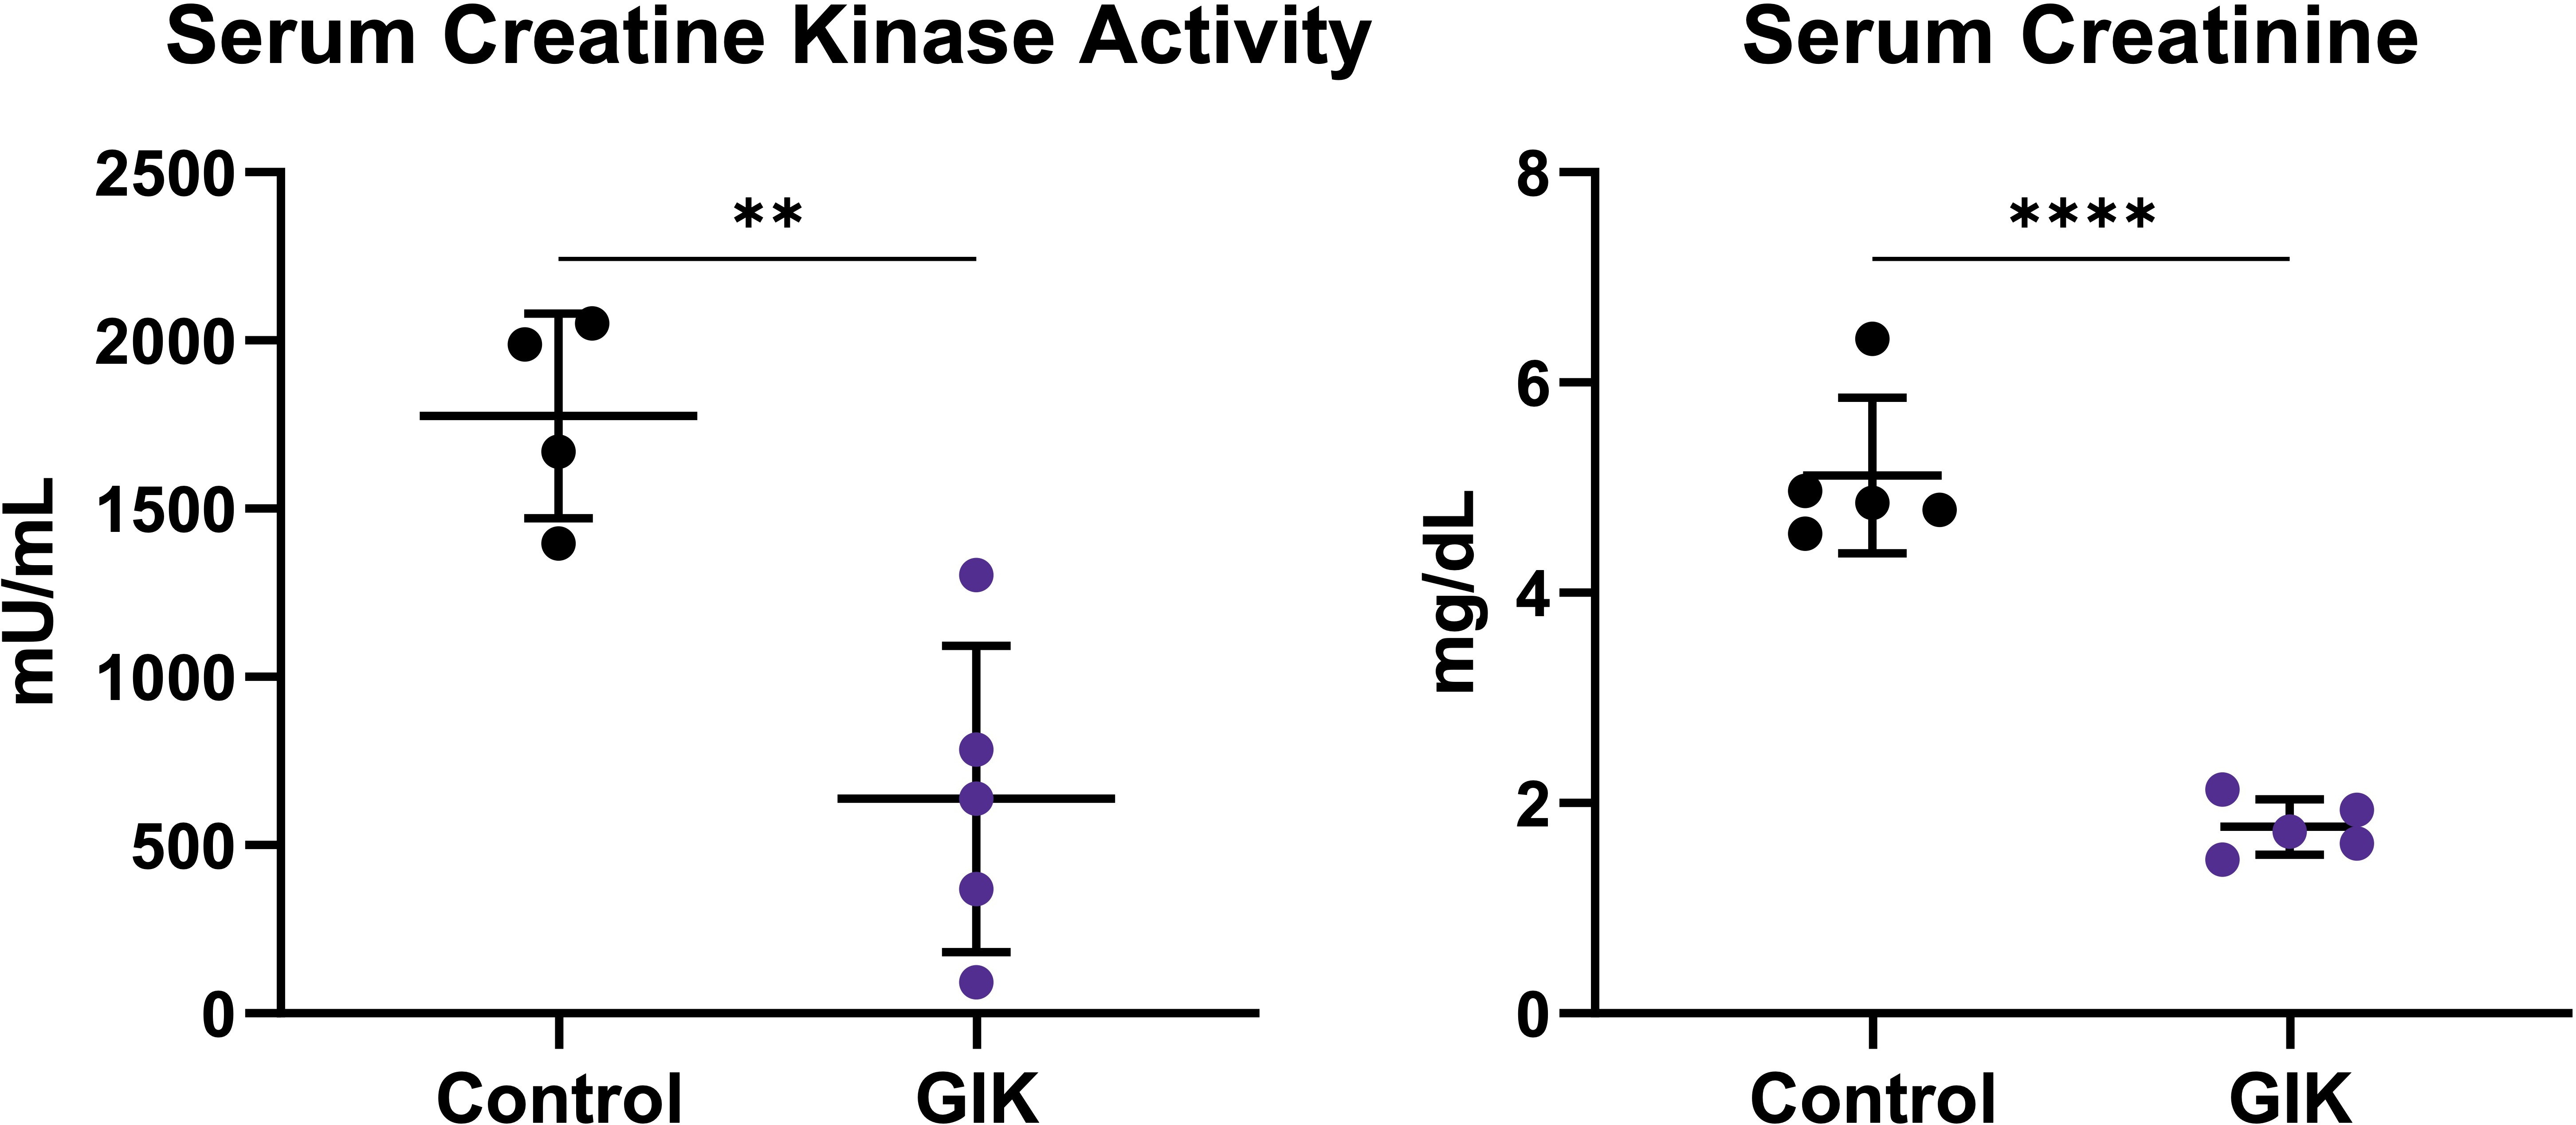 Fig. 3 
          Serum analysis of creatine kinase activity to quantify circulating skeletal muscle breakdown products and creatinine concentration as a marker of kidney injury. Both creatine kinase activity and creatinine concentration were significantly greater in the control cohort compared to the glucose-insulin-potassium (GIK) cohort (creatine kinase activity: 1,776 (n = 4) vs 637.7 (n = 5), p = 0.004; creatinine: 5.12 (n = 5) vs 1.78 (n = 5), p < 0.001, independent-samples t-test). **p ≤ 0.01; ****p ≤ 0.001.
        